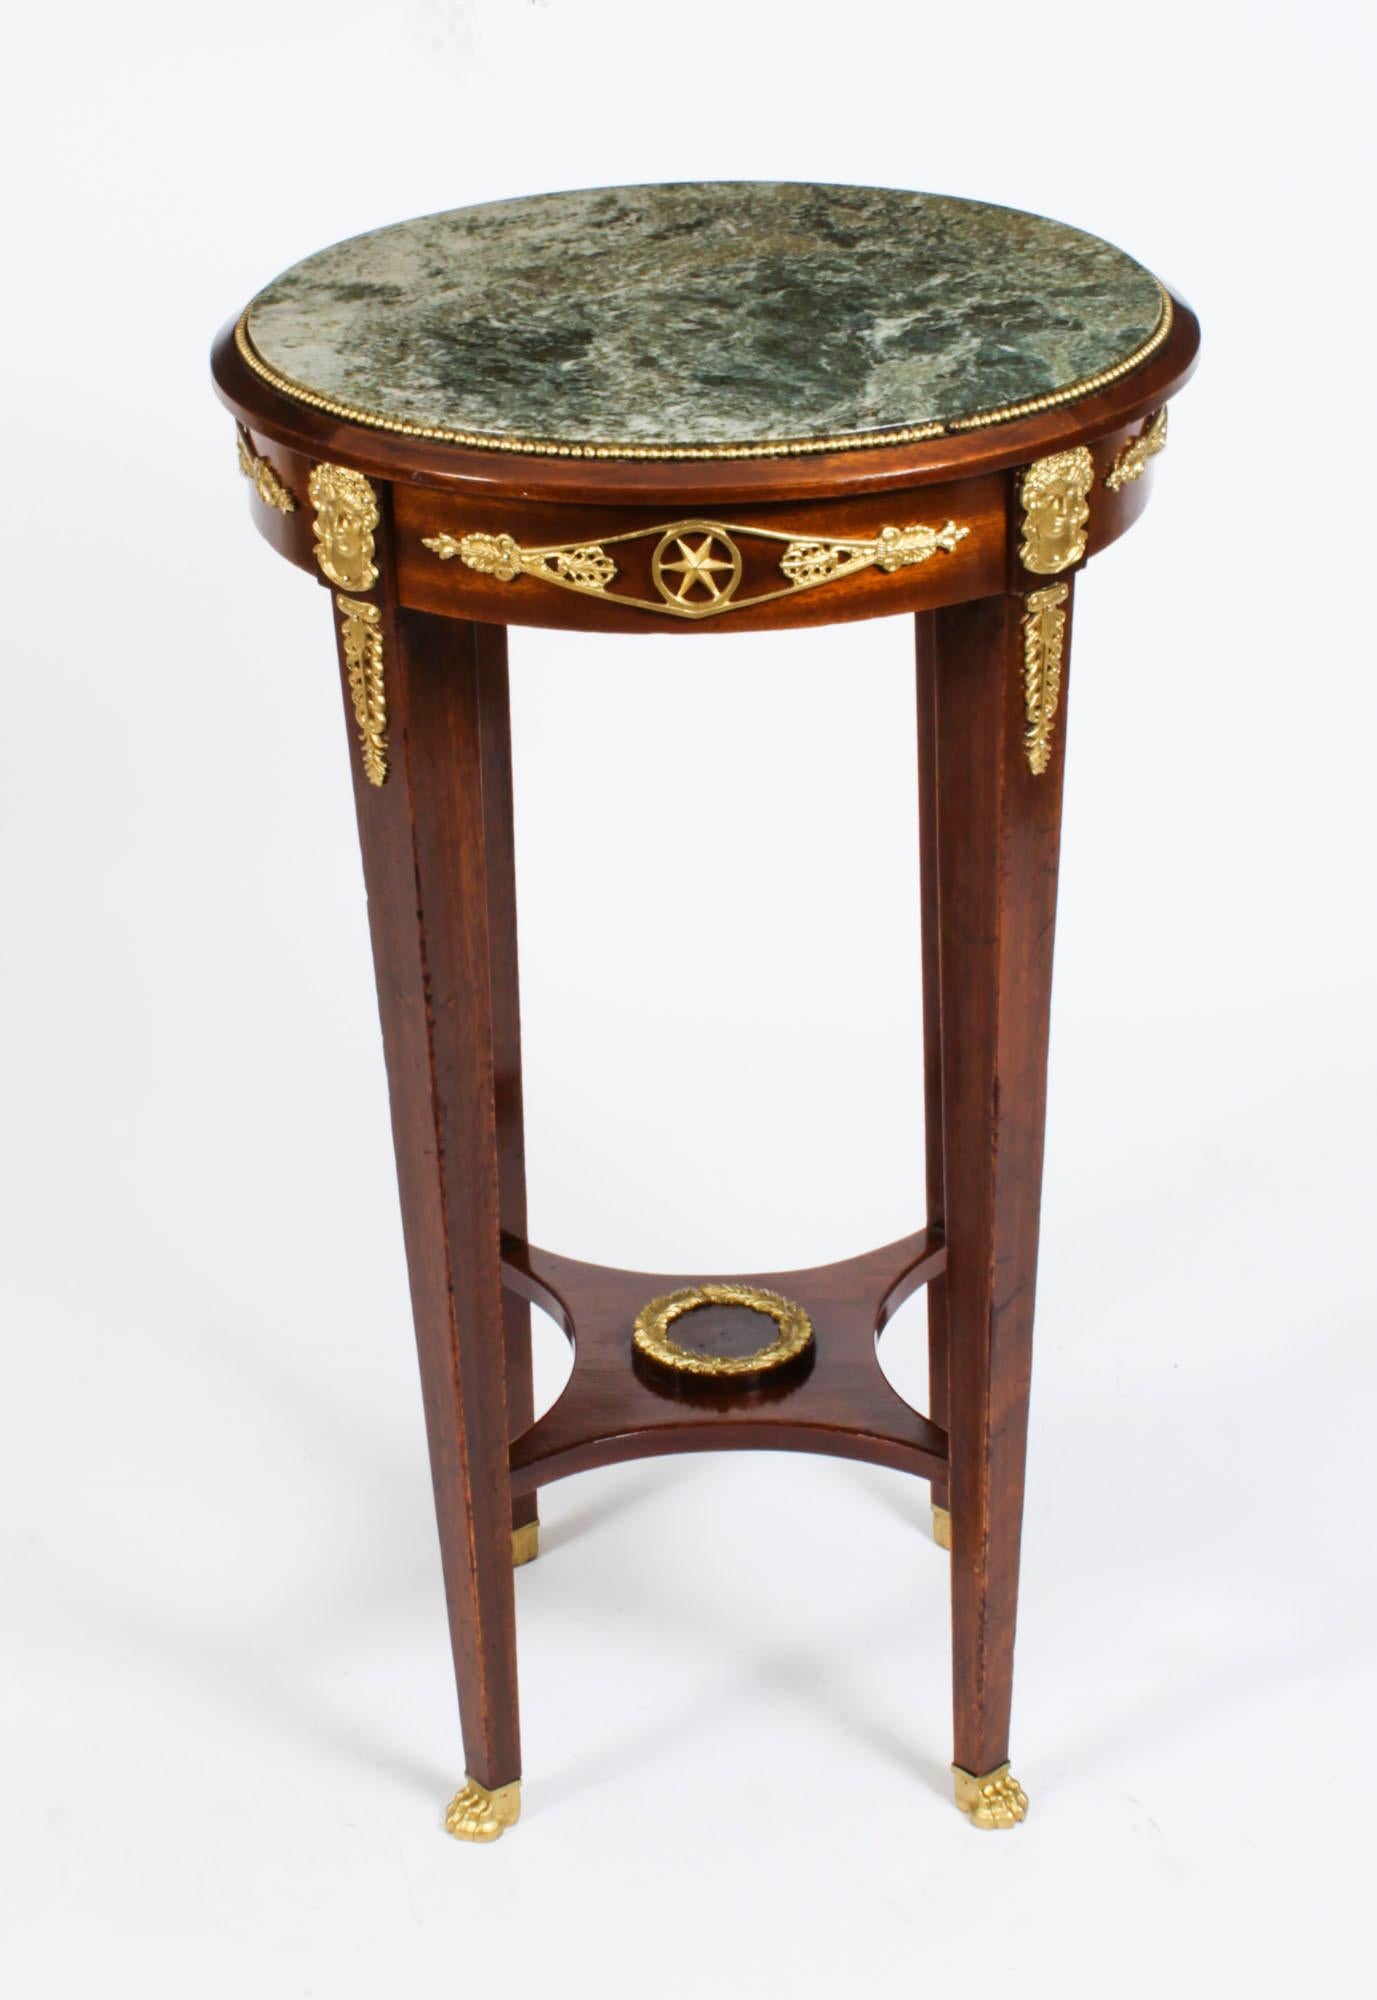 Antique French Empire Marble & Ormolu Occasional Table, 19th C 8